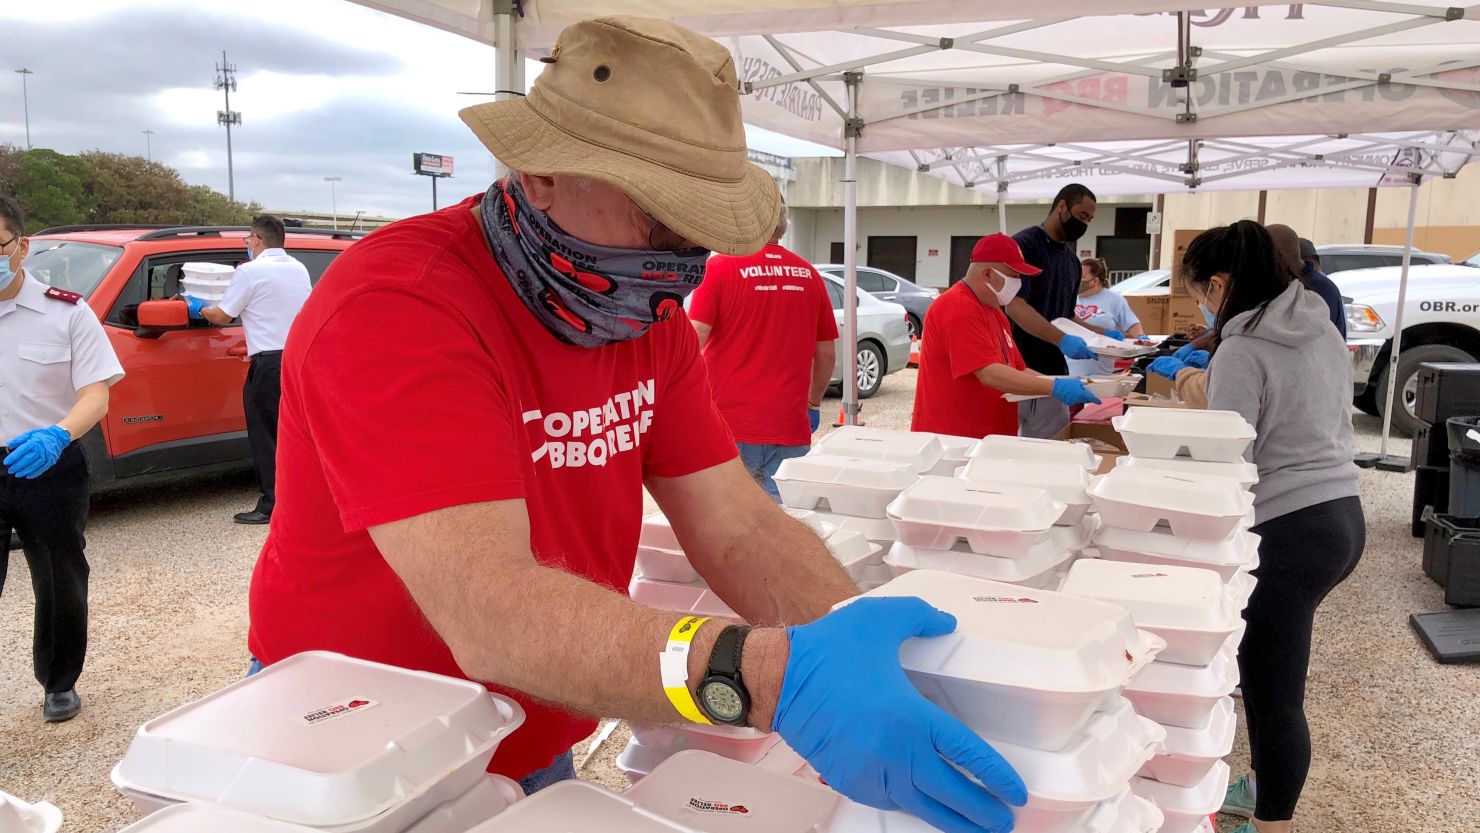 Operation BBQ Relief provided thousands of free hot meals this week in Houston.